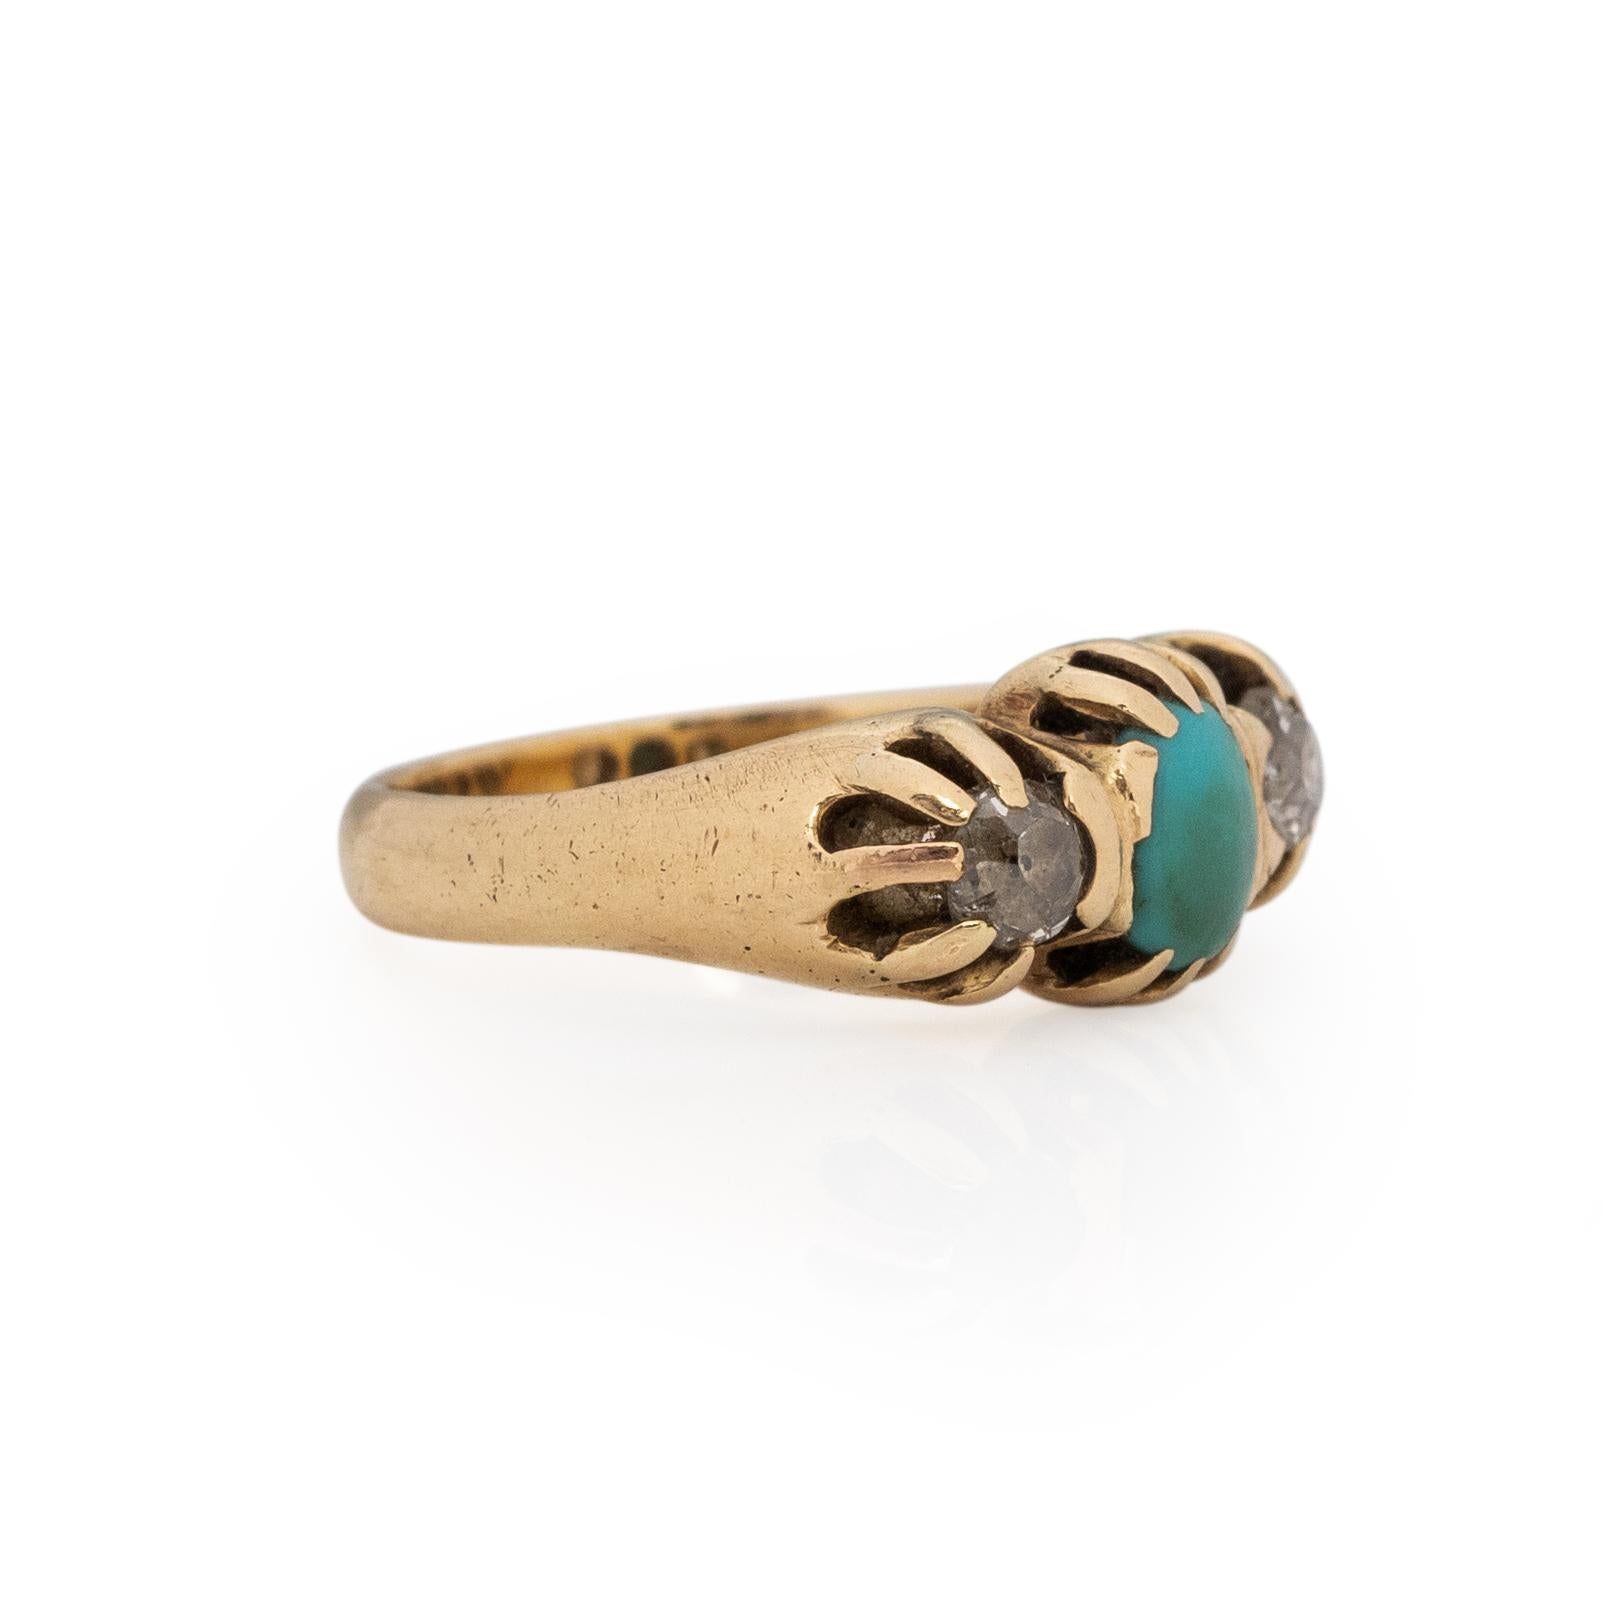 This Victorian classic has a Blecher style feel with a three stone look. Crafted in 14K yellow gold the prong setting holds two Old Mine cut diamonds and one robins egg blue oval turquoise cab. The look is simple and elegant, the pop or turquoise